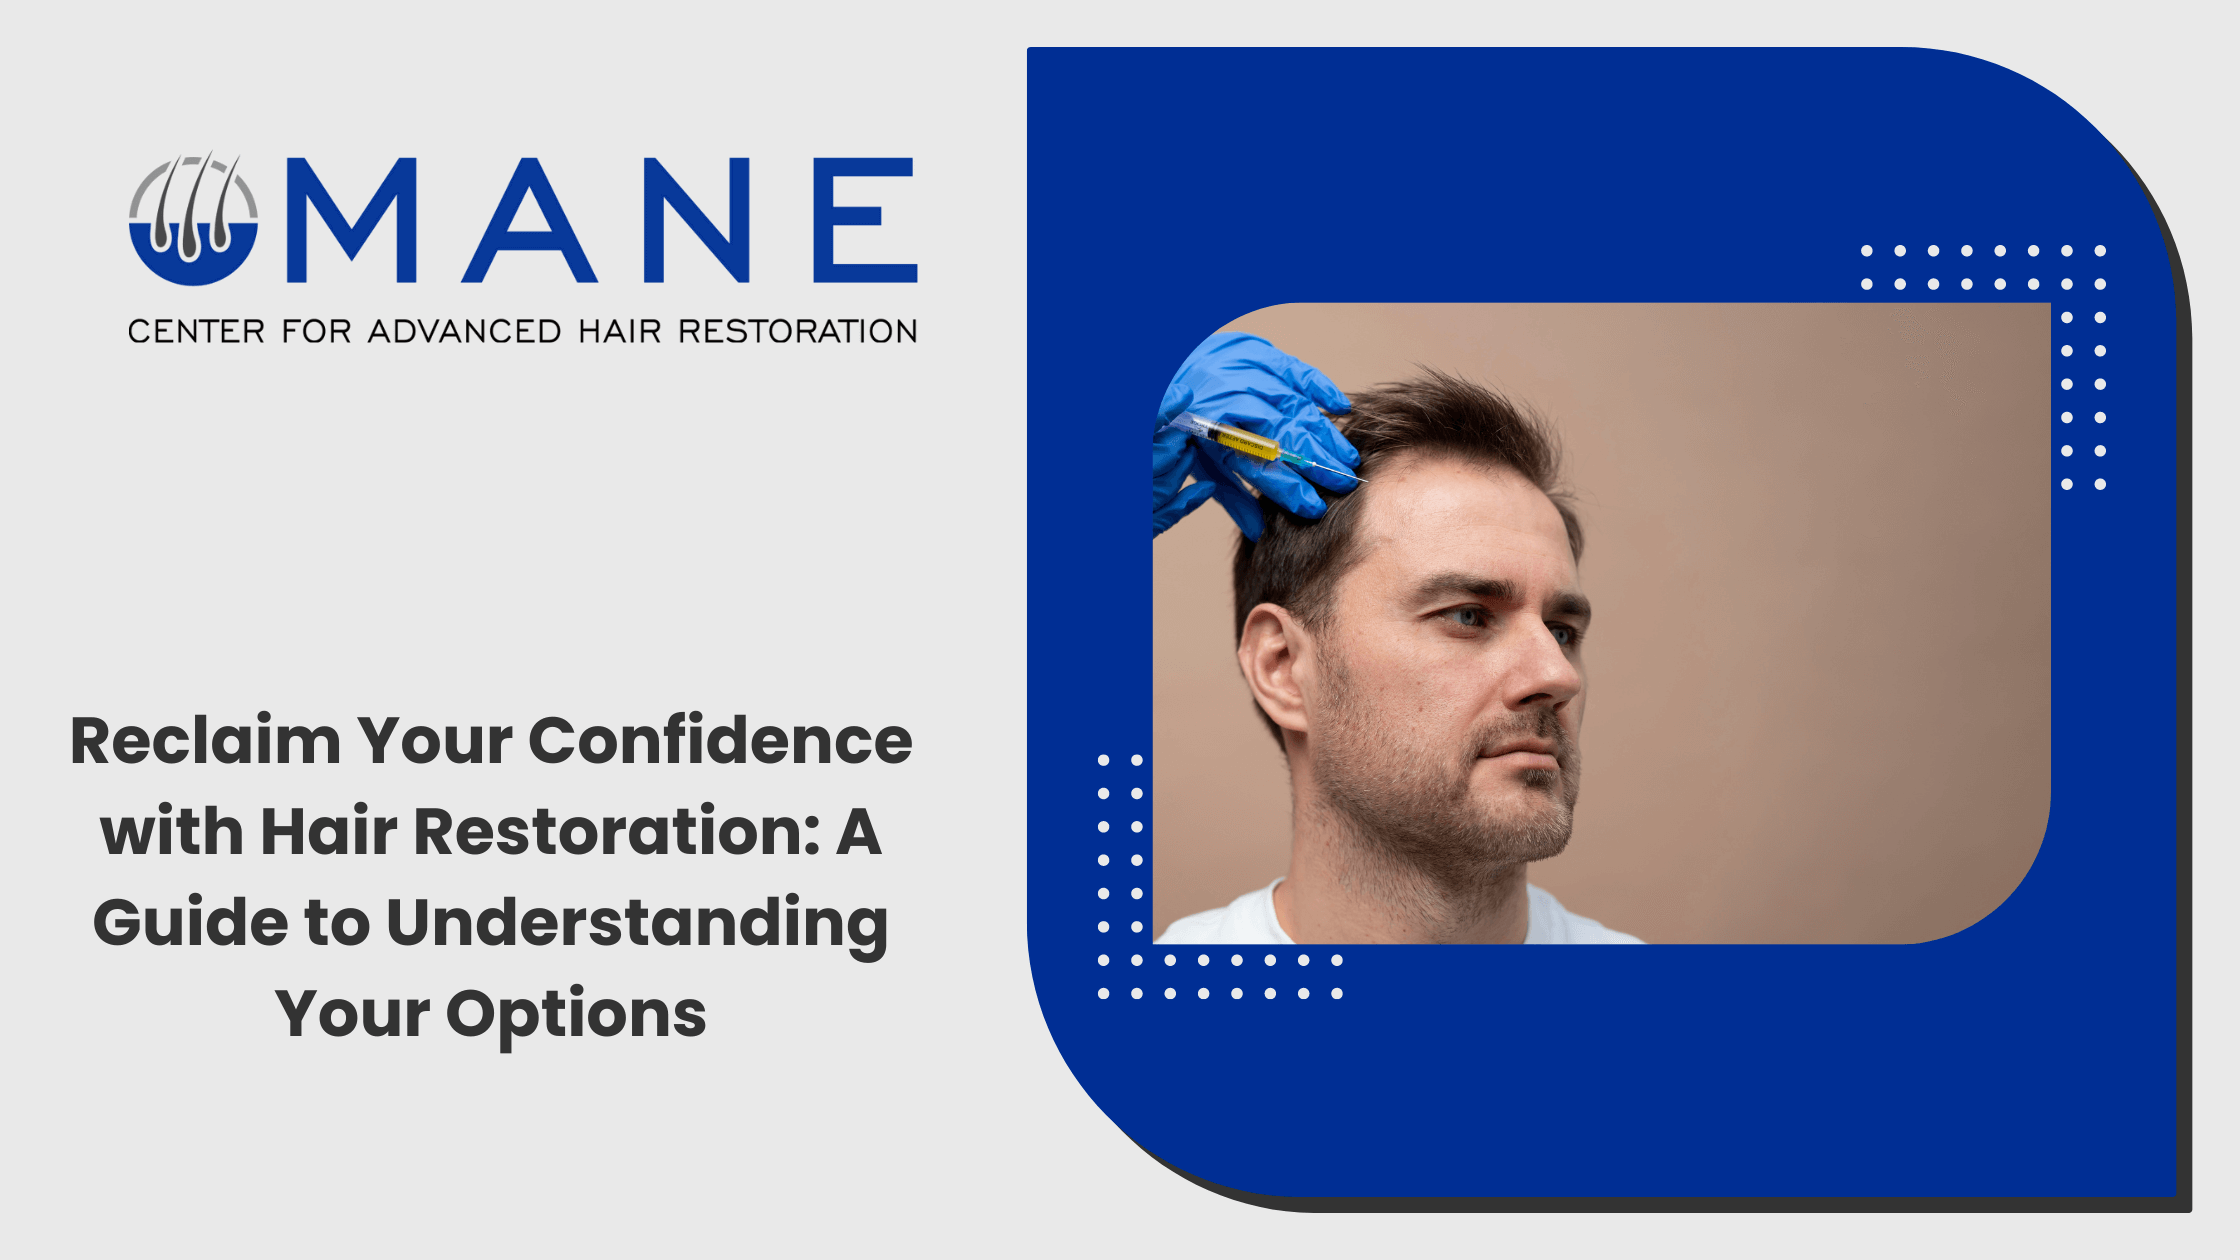 Reclaim Your Confidence with Hair Restoration: A Guide to Understanding Your Options